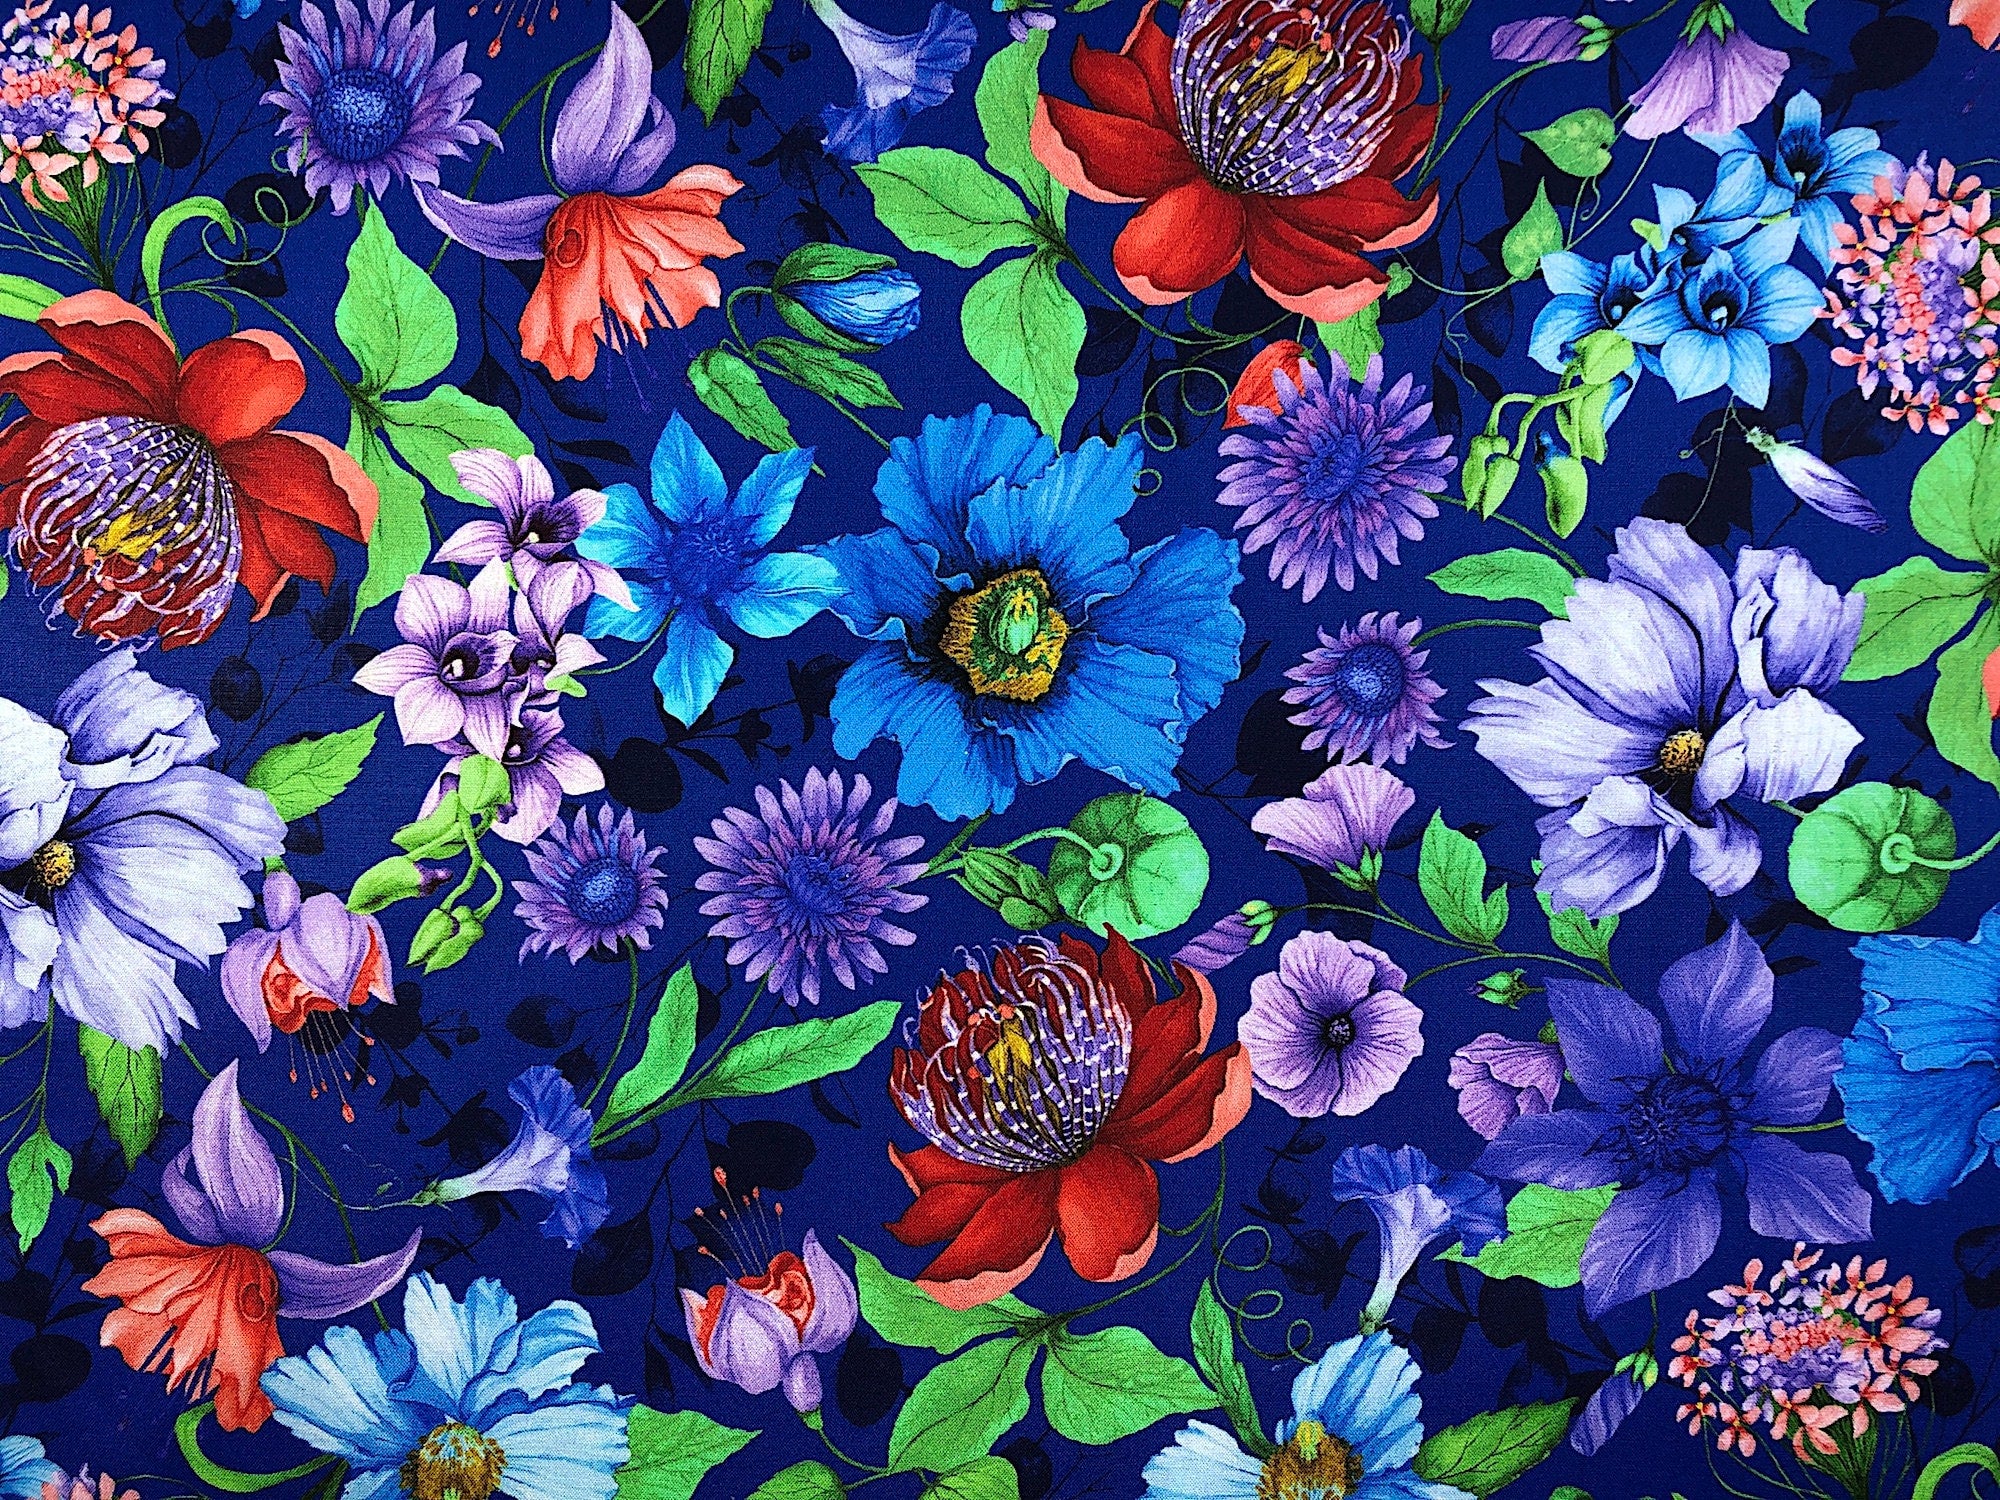 This Blue fabric is covered with flowers of all types that are placed randomly throughout the pattern.